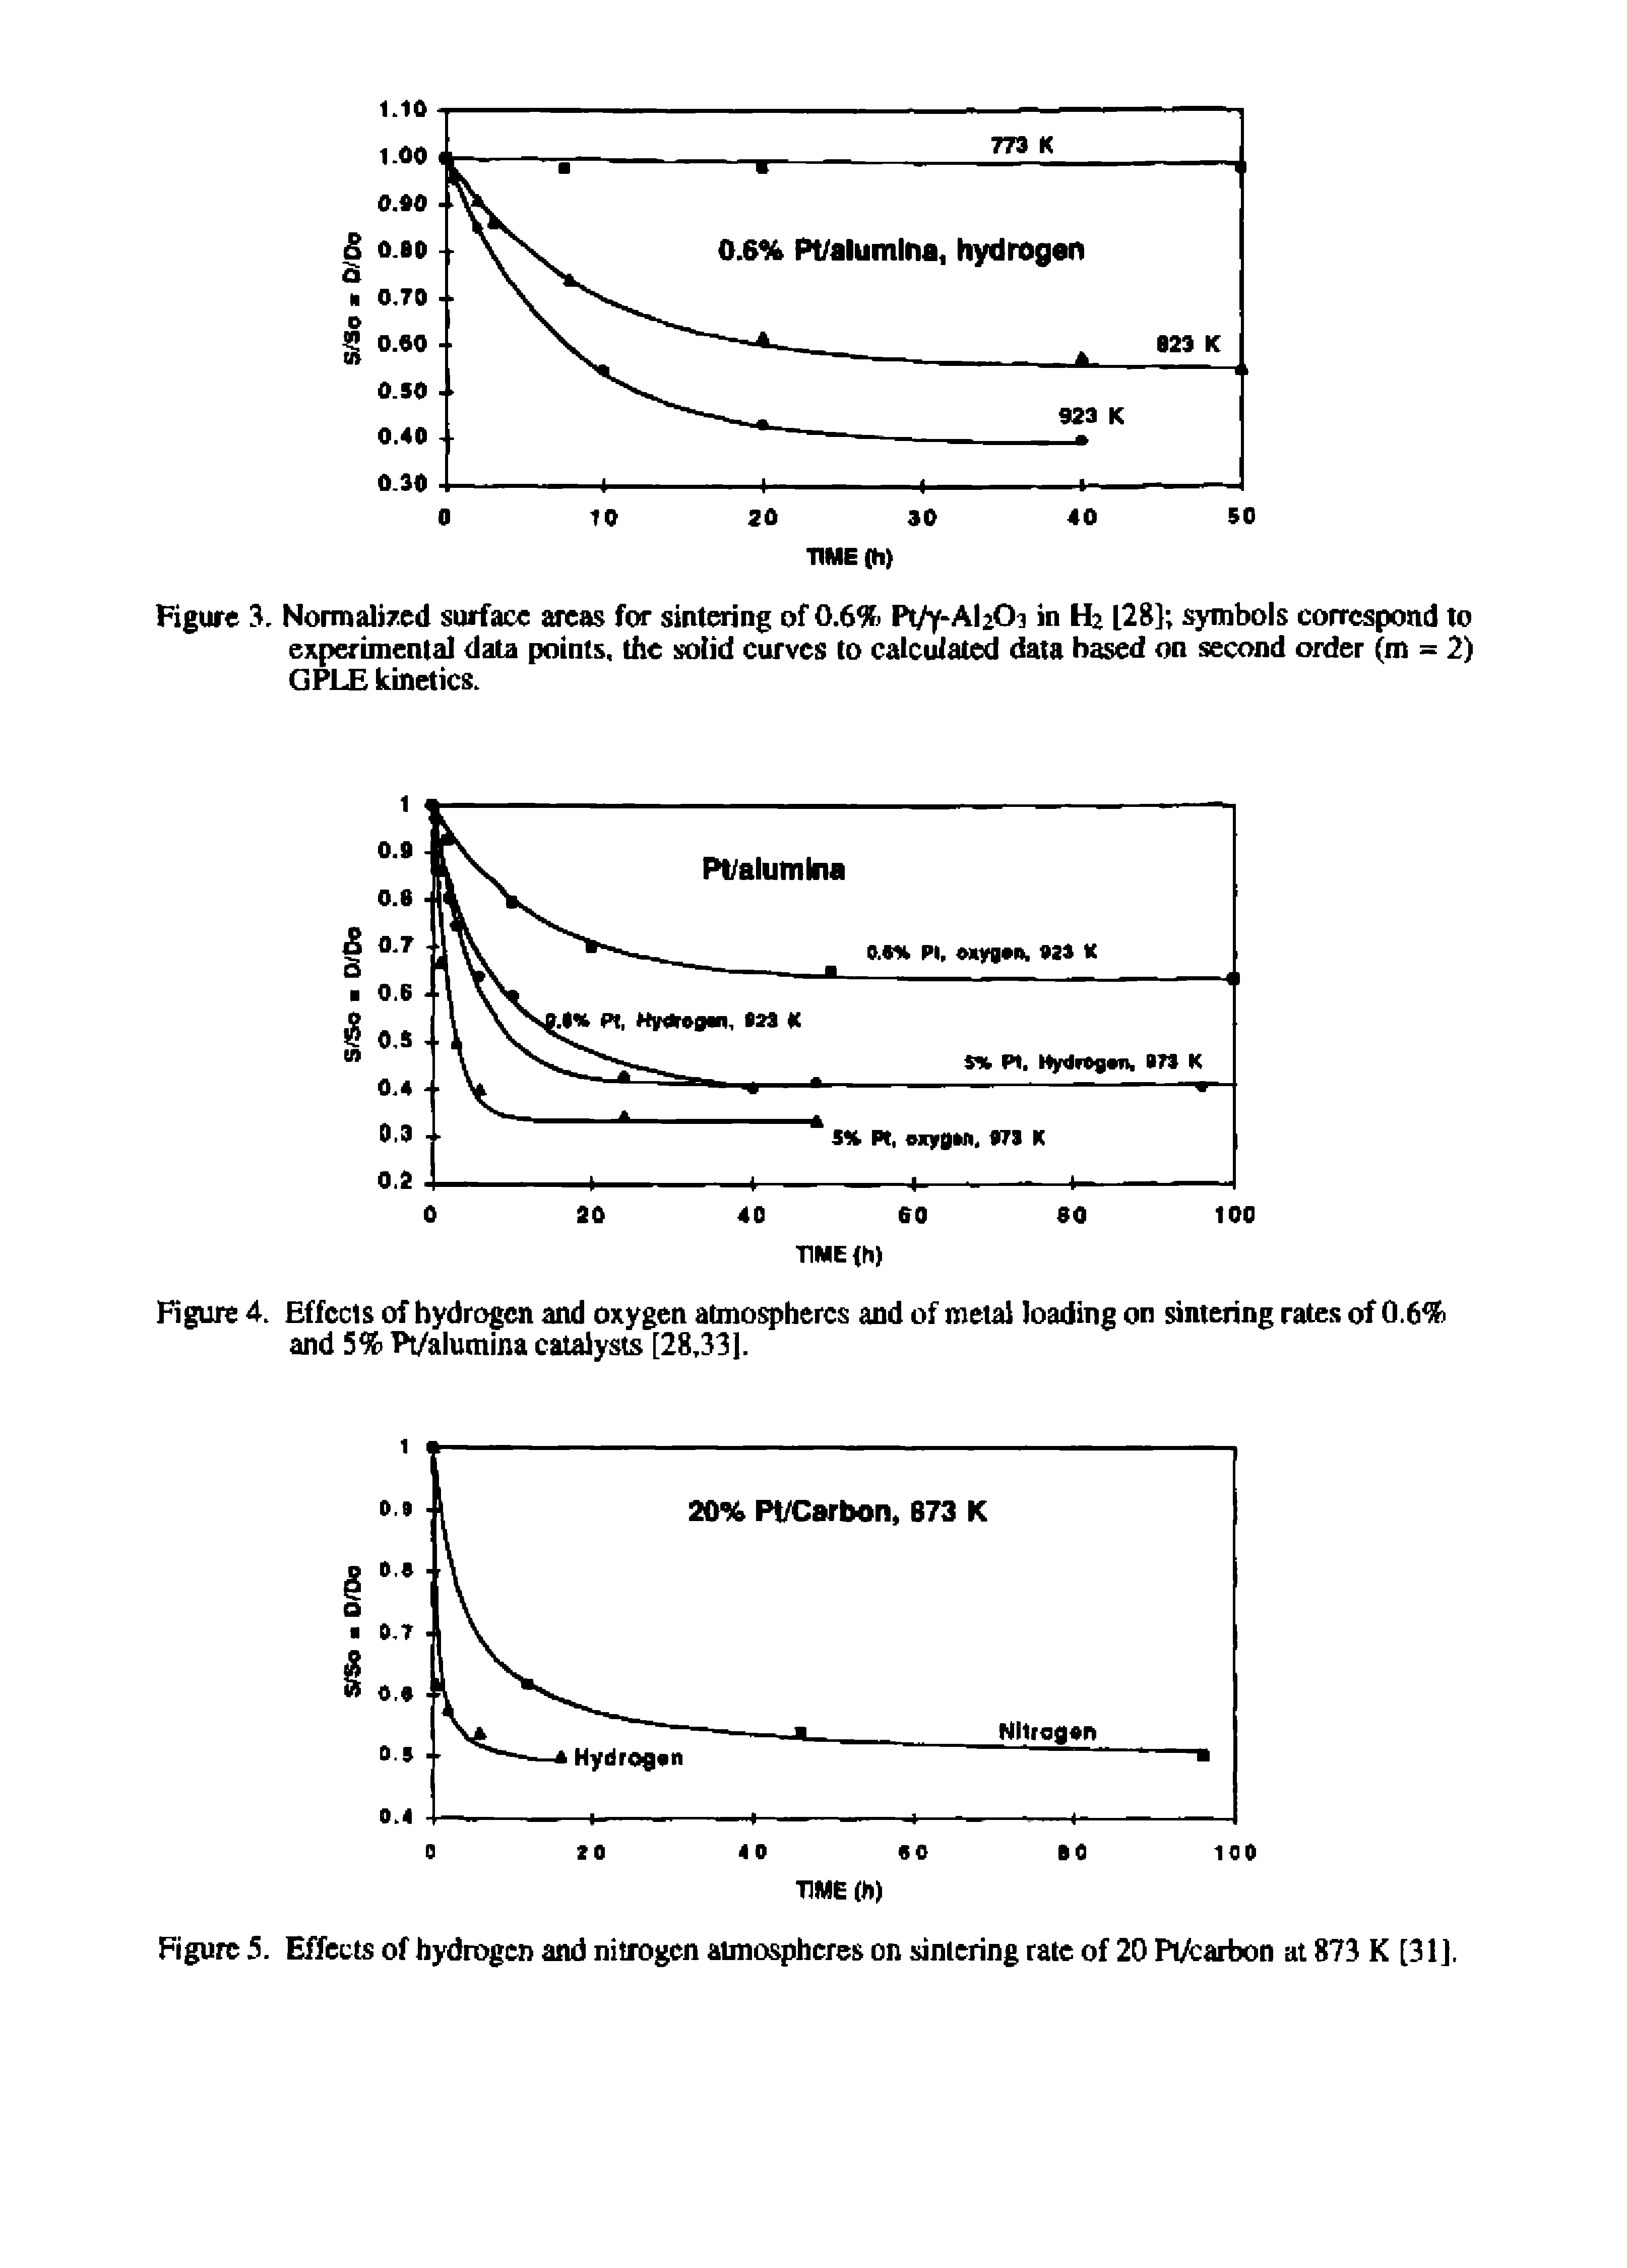 Figure 5. Effects of hydrogen and nitrogen atmospheres on sintering rate of 20 Pl/carbon at 873 K [31J.